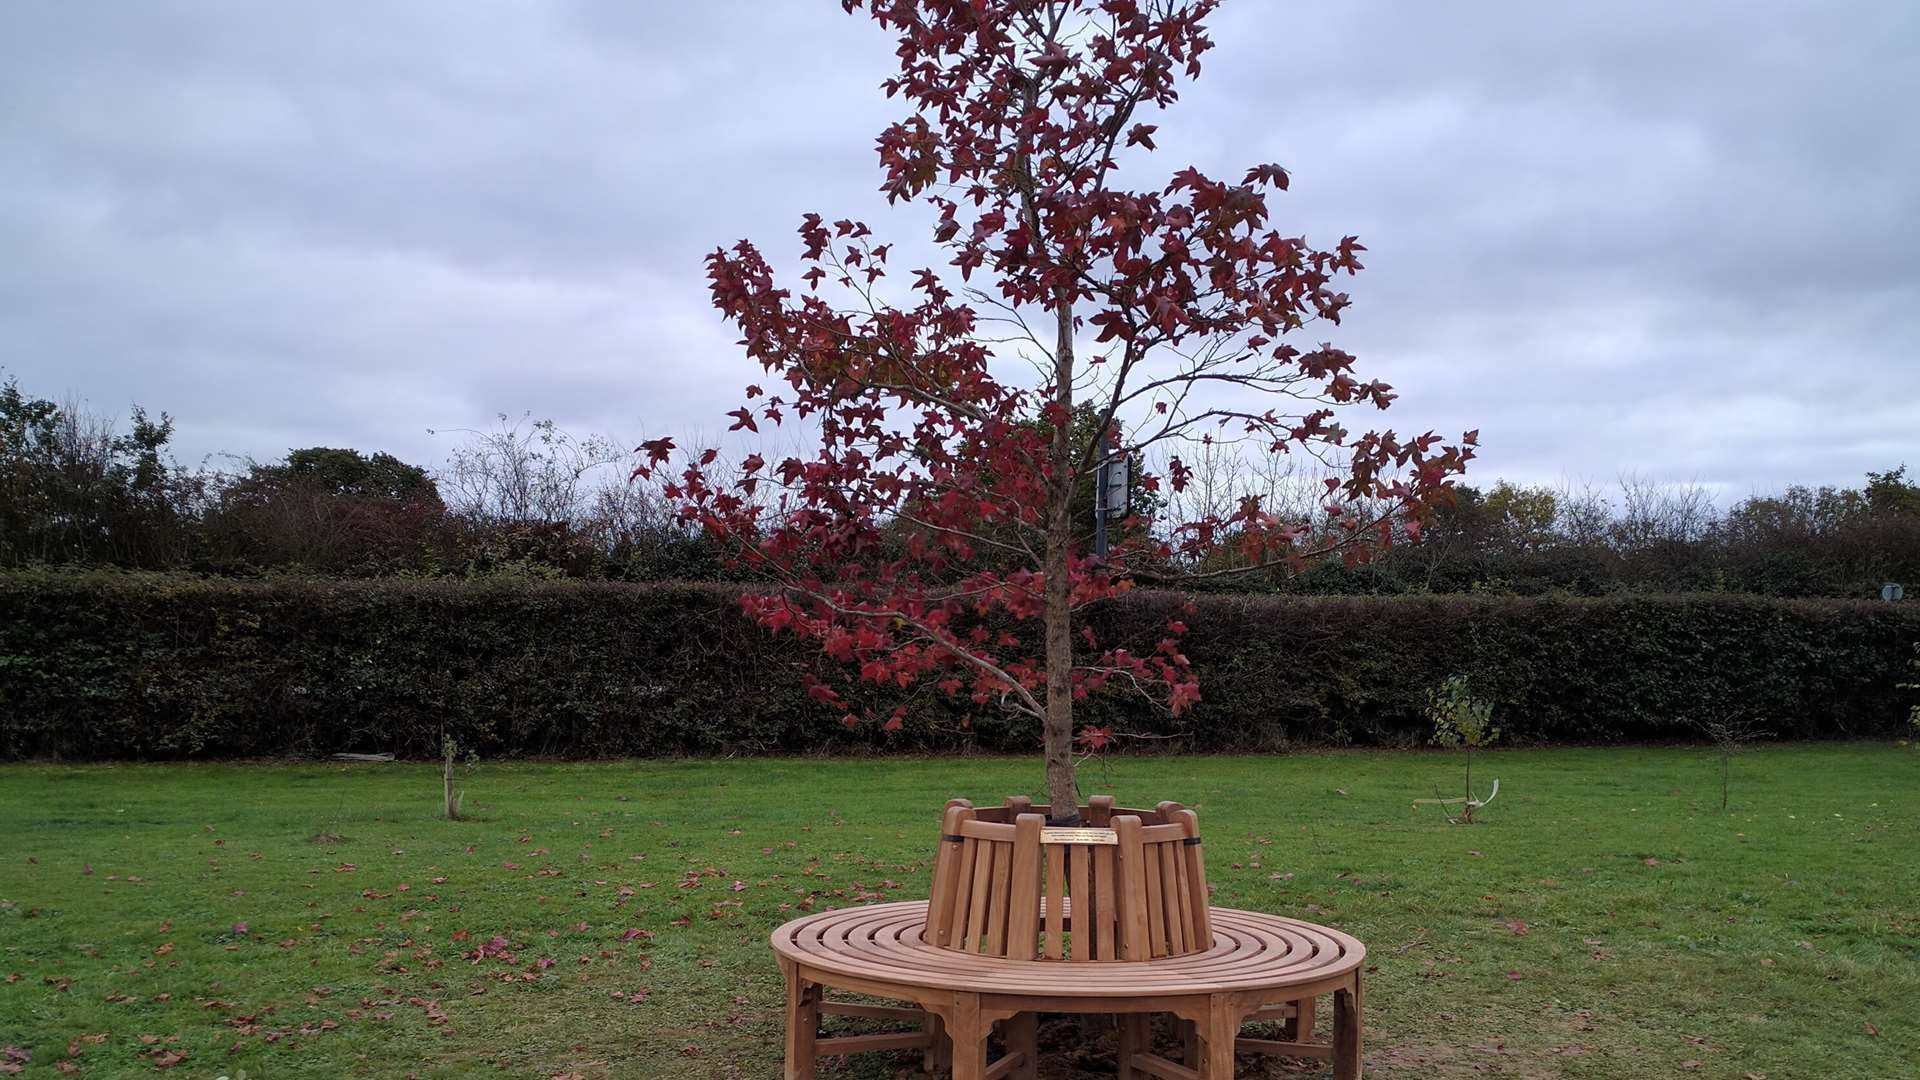 The tree and bench at Hoostead Green dedicated to Ben's memory